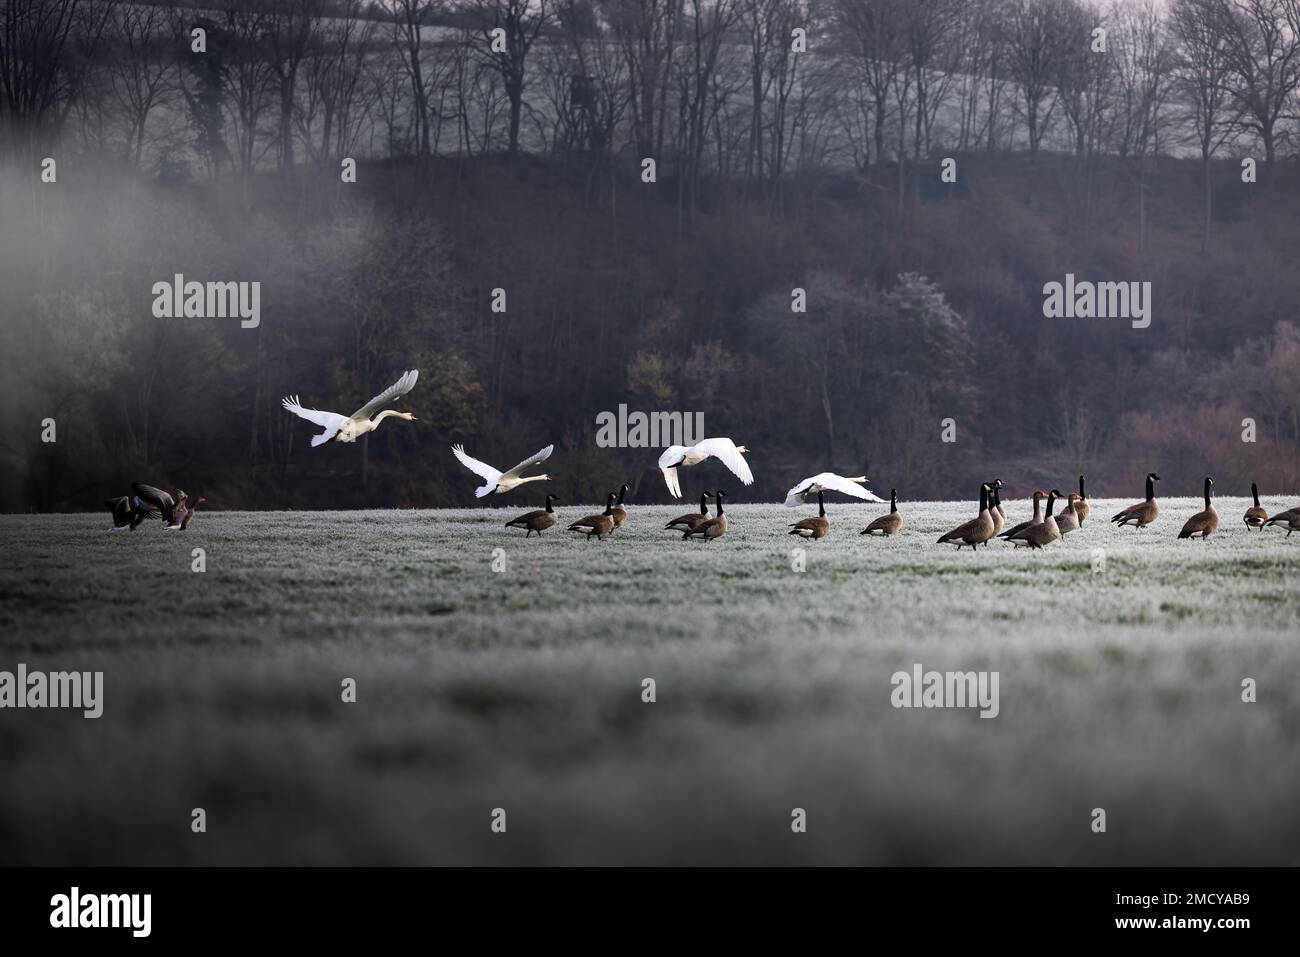 White swans fly over canadian goose sitting on frozen grass, forest in the background in Germany Stock Photo